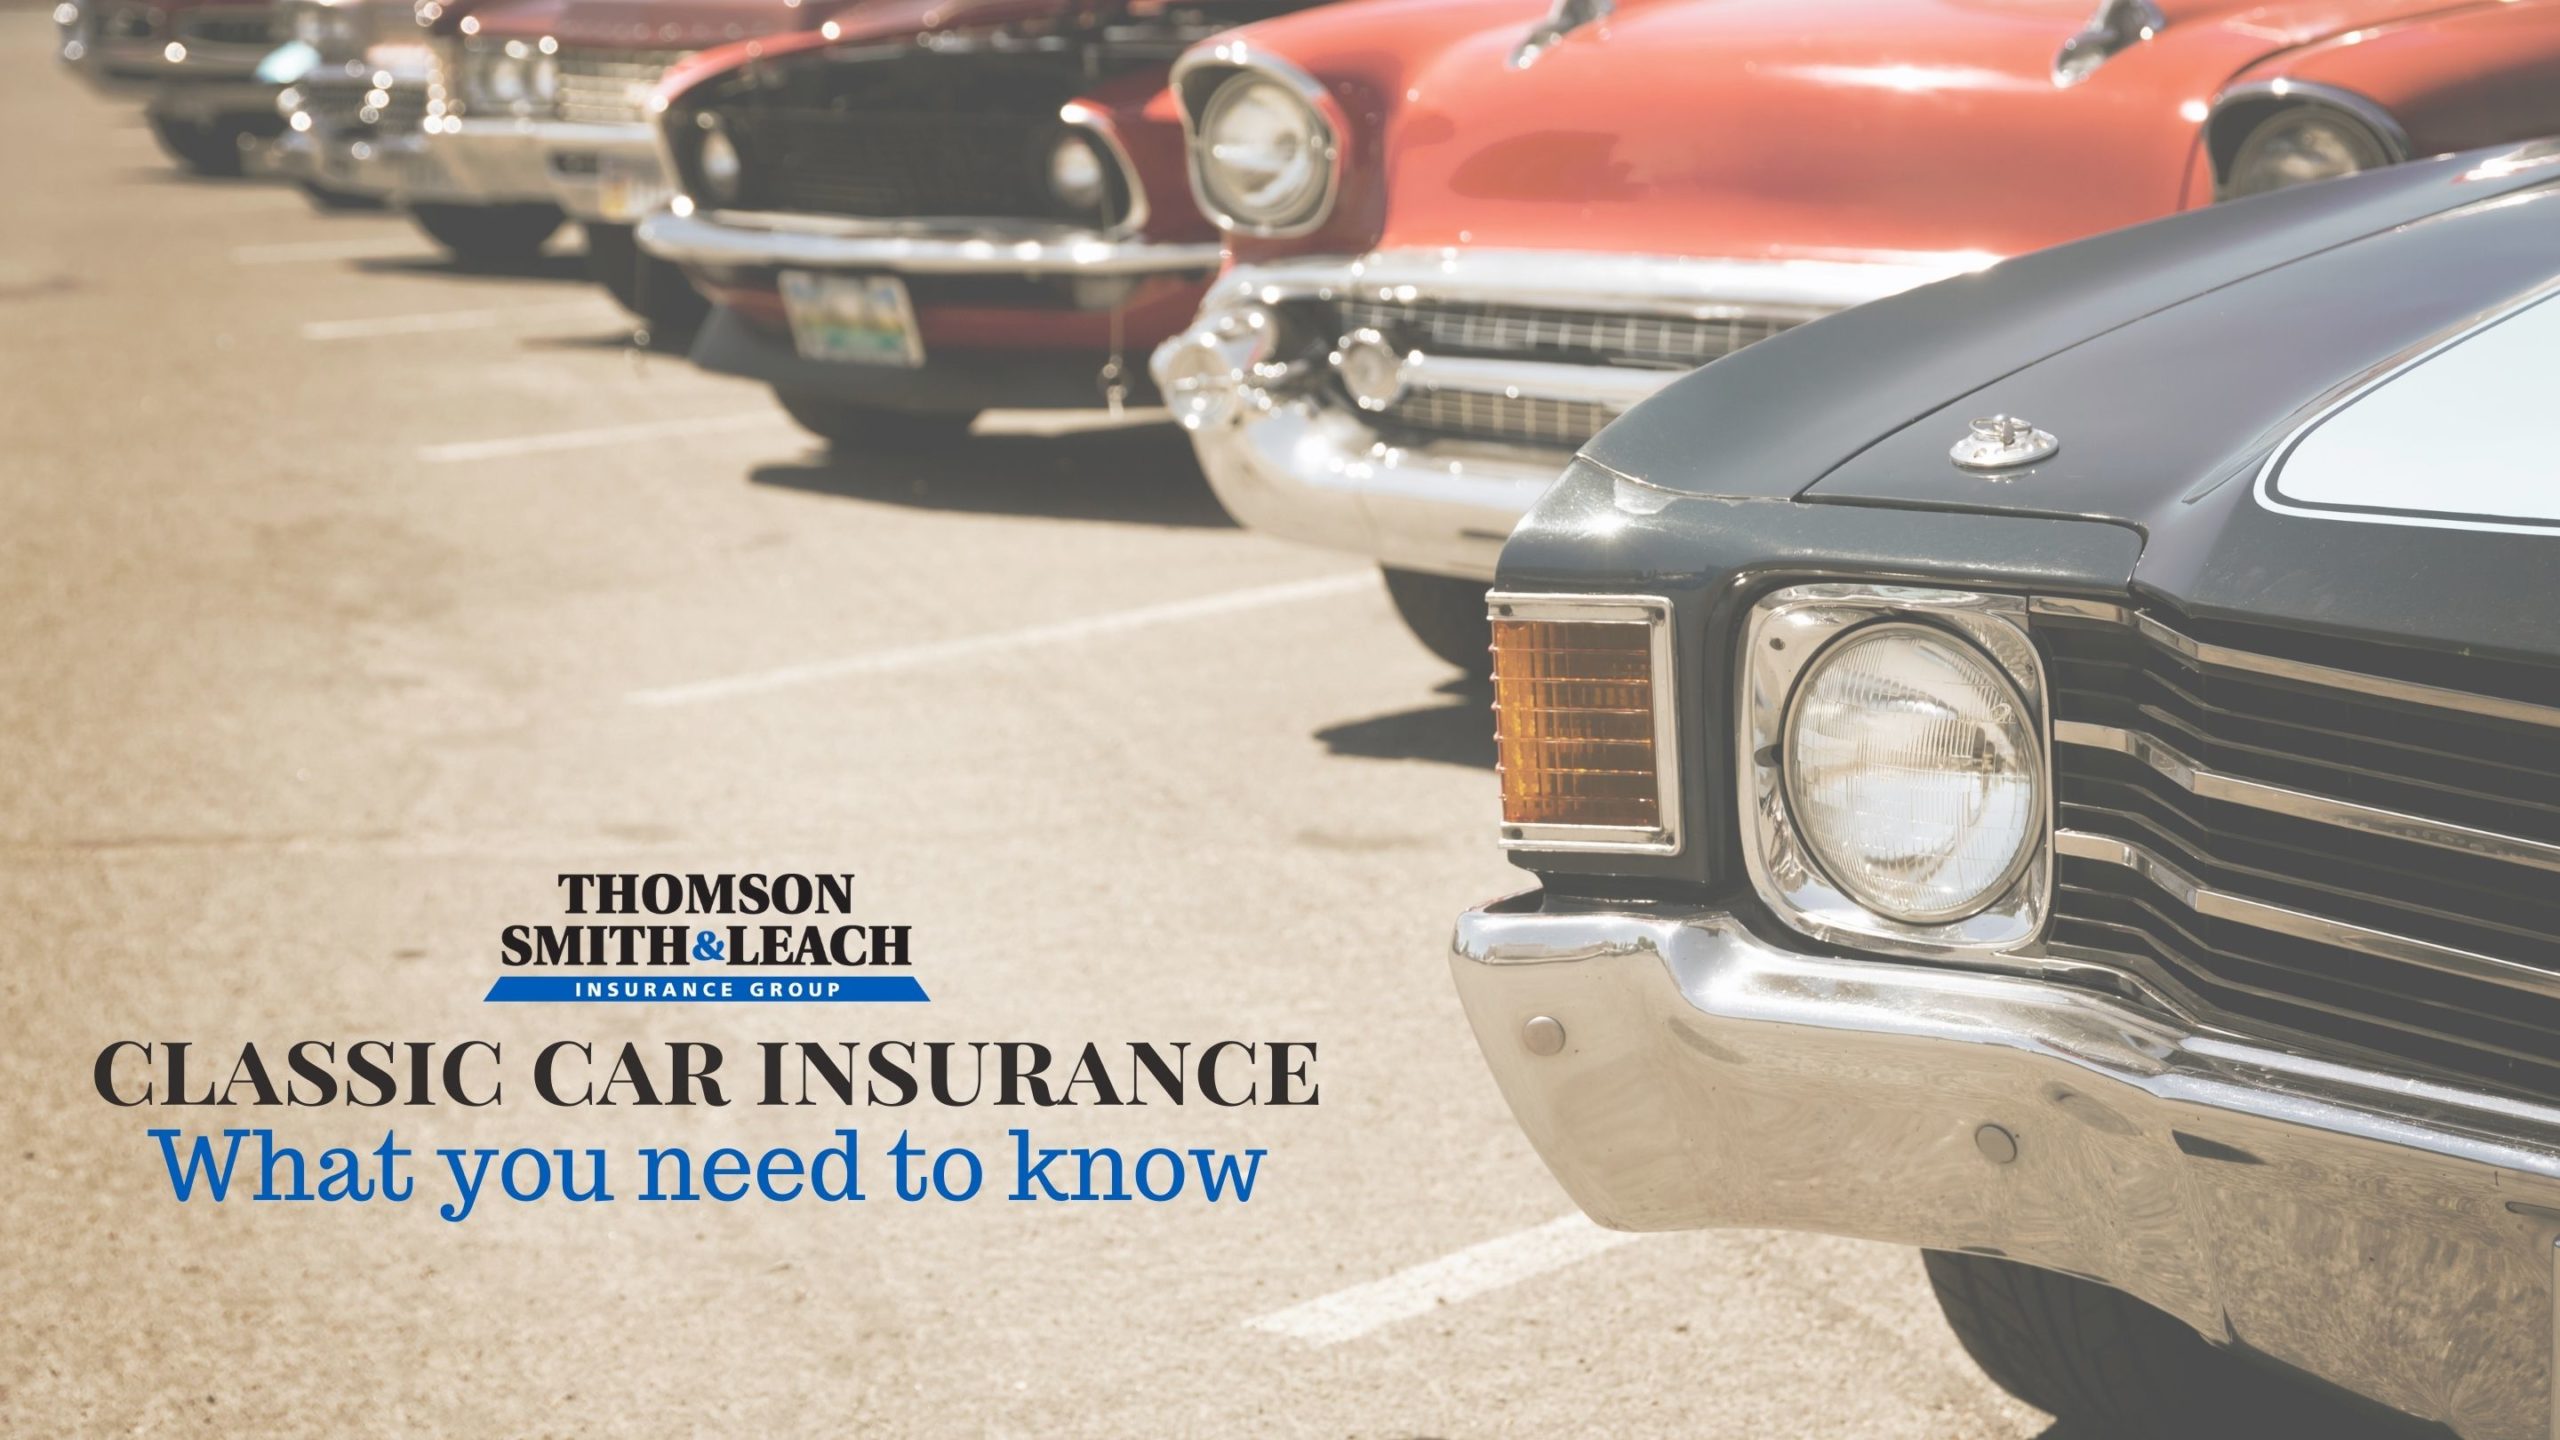 Classic Car Insurance What You Need to Know - Thomson Smith & Leach